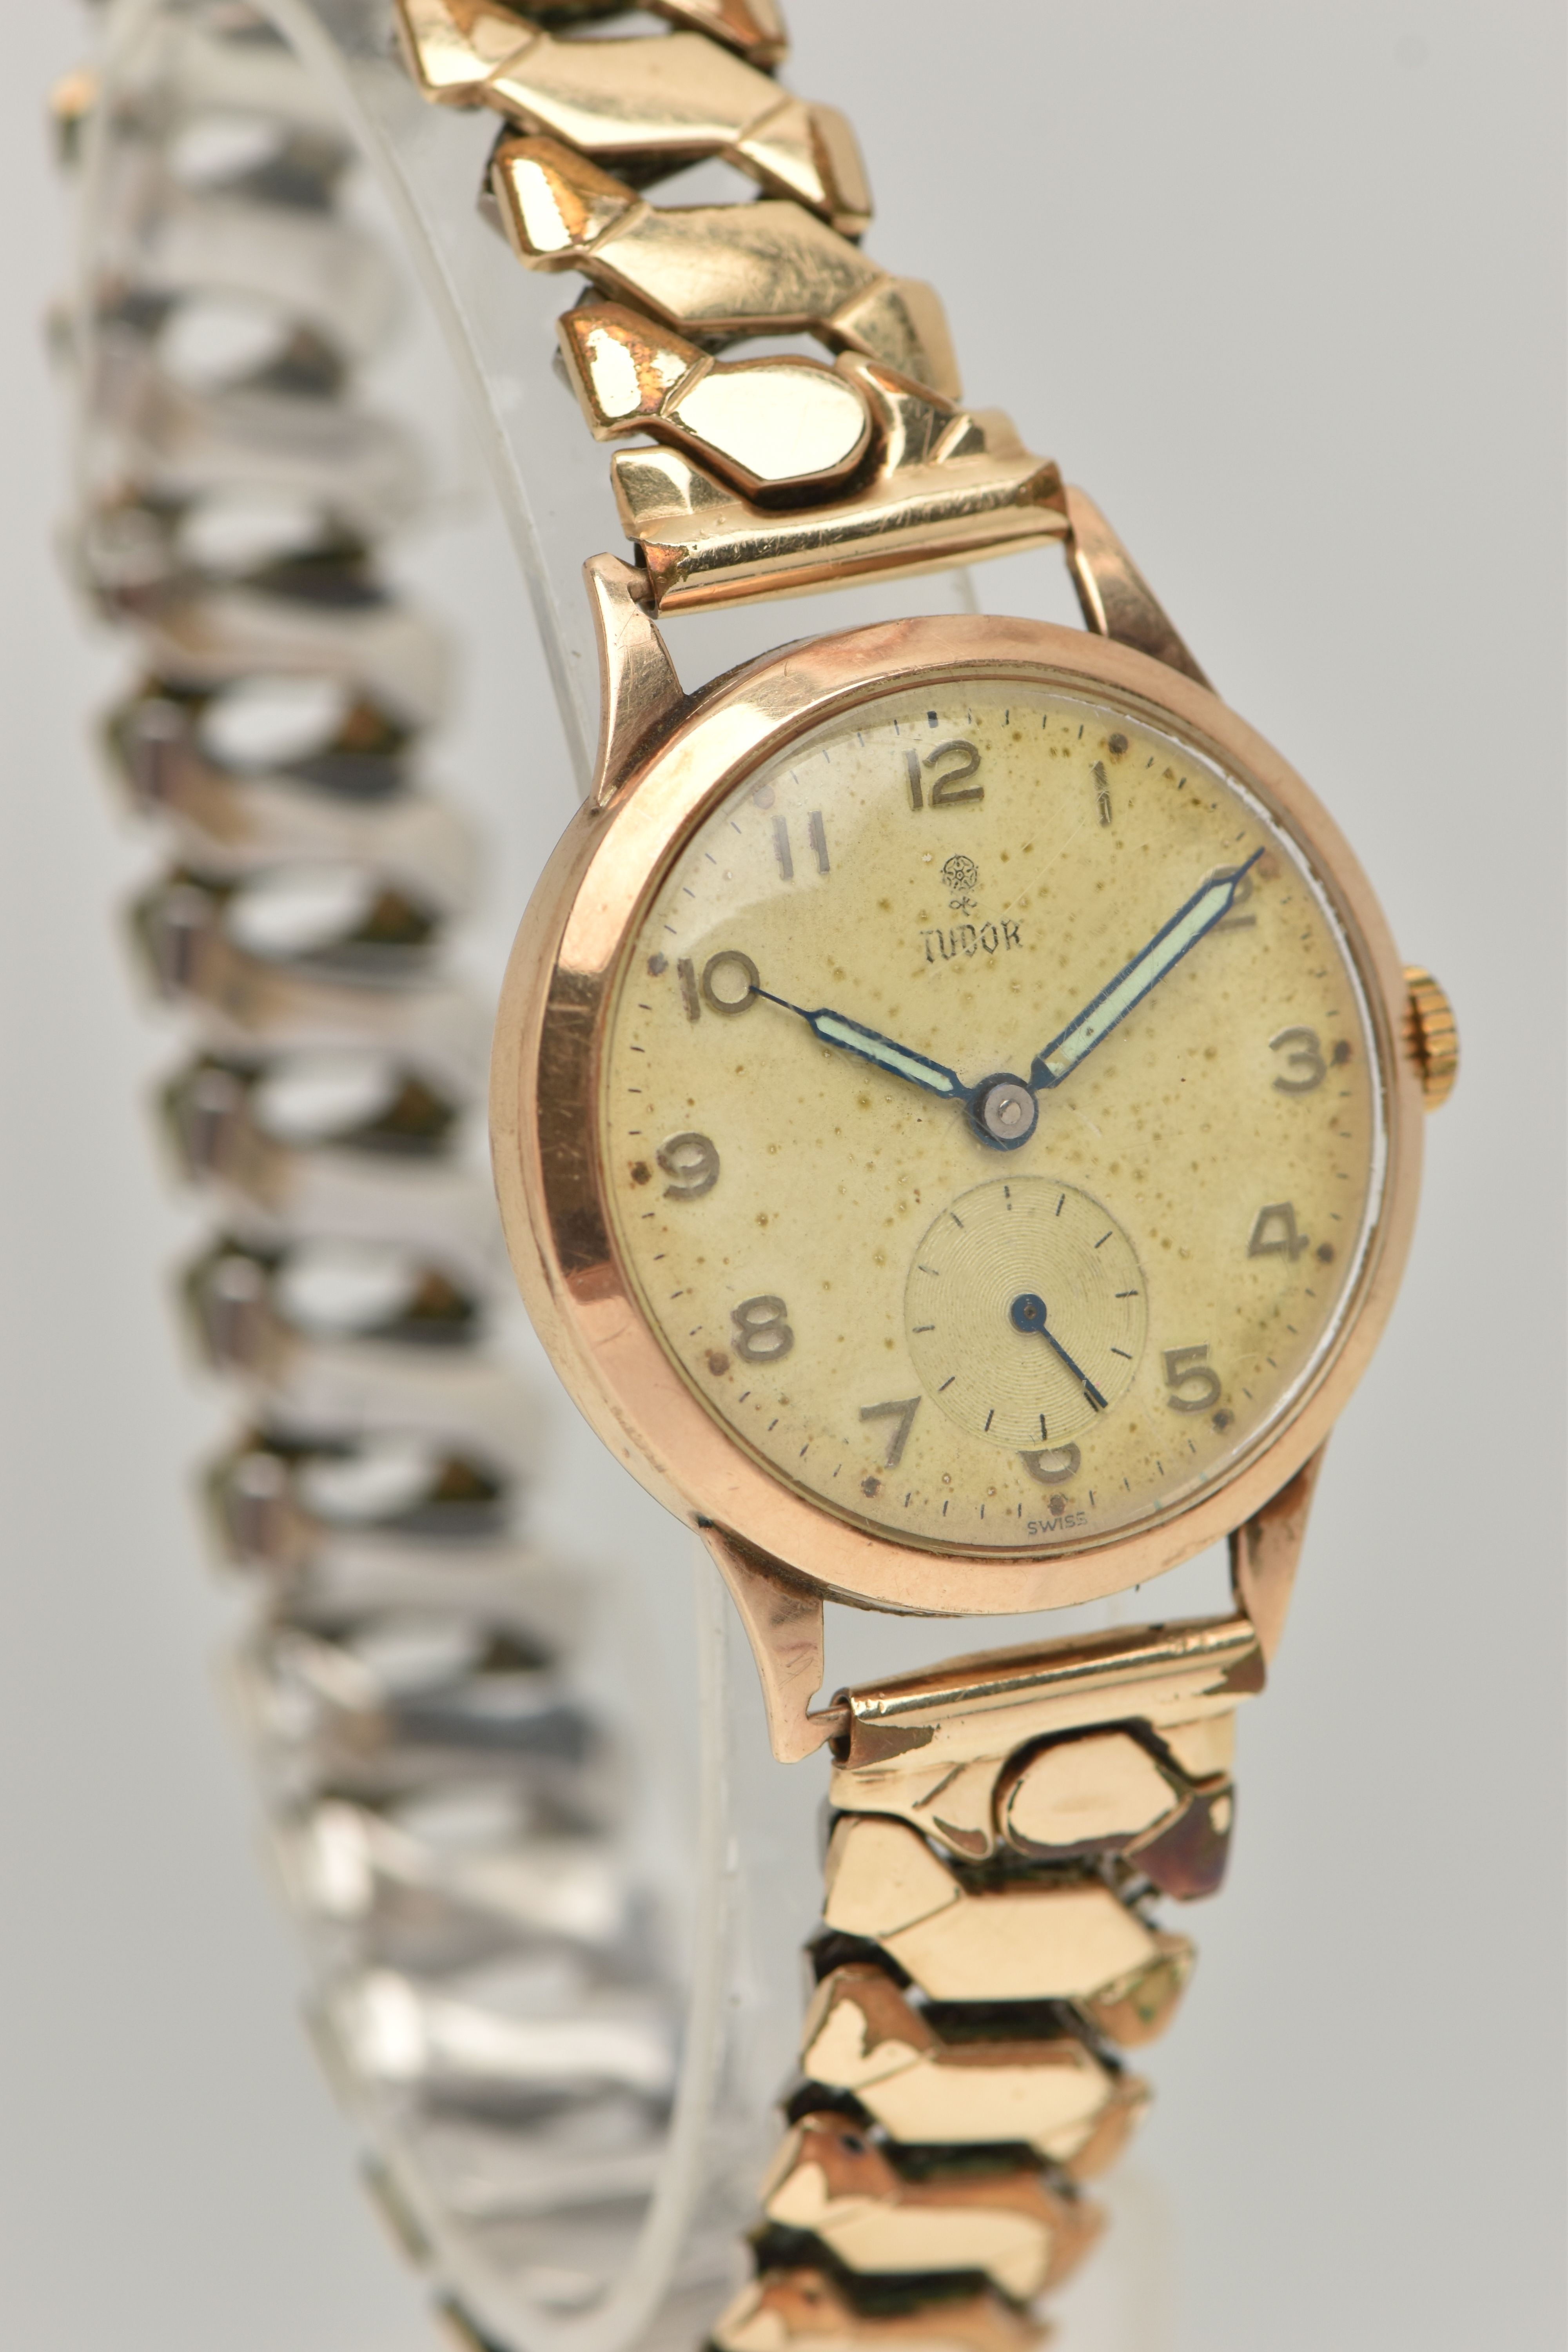 A 9CT GOLD 'TUDOR' WRISTWATCH, hand wound movement, round dial signed 'Tudor', Arabic numerals, - Image 2 of 6